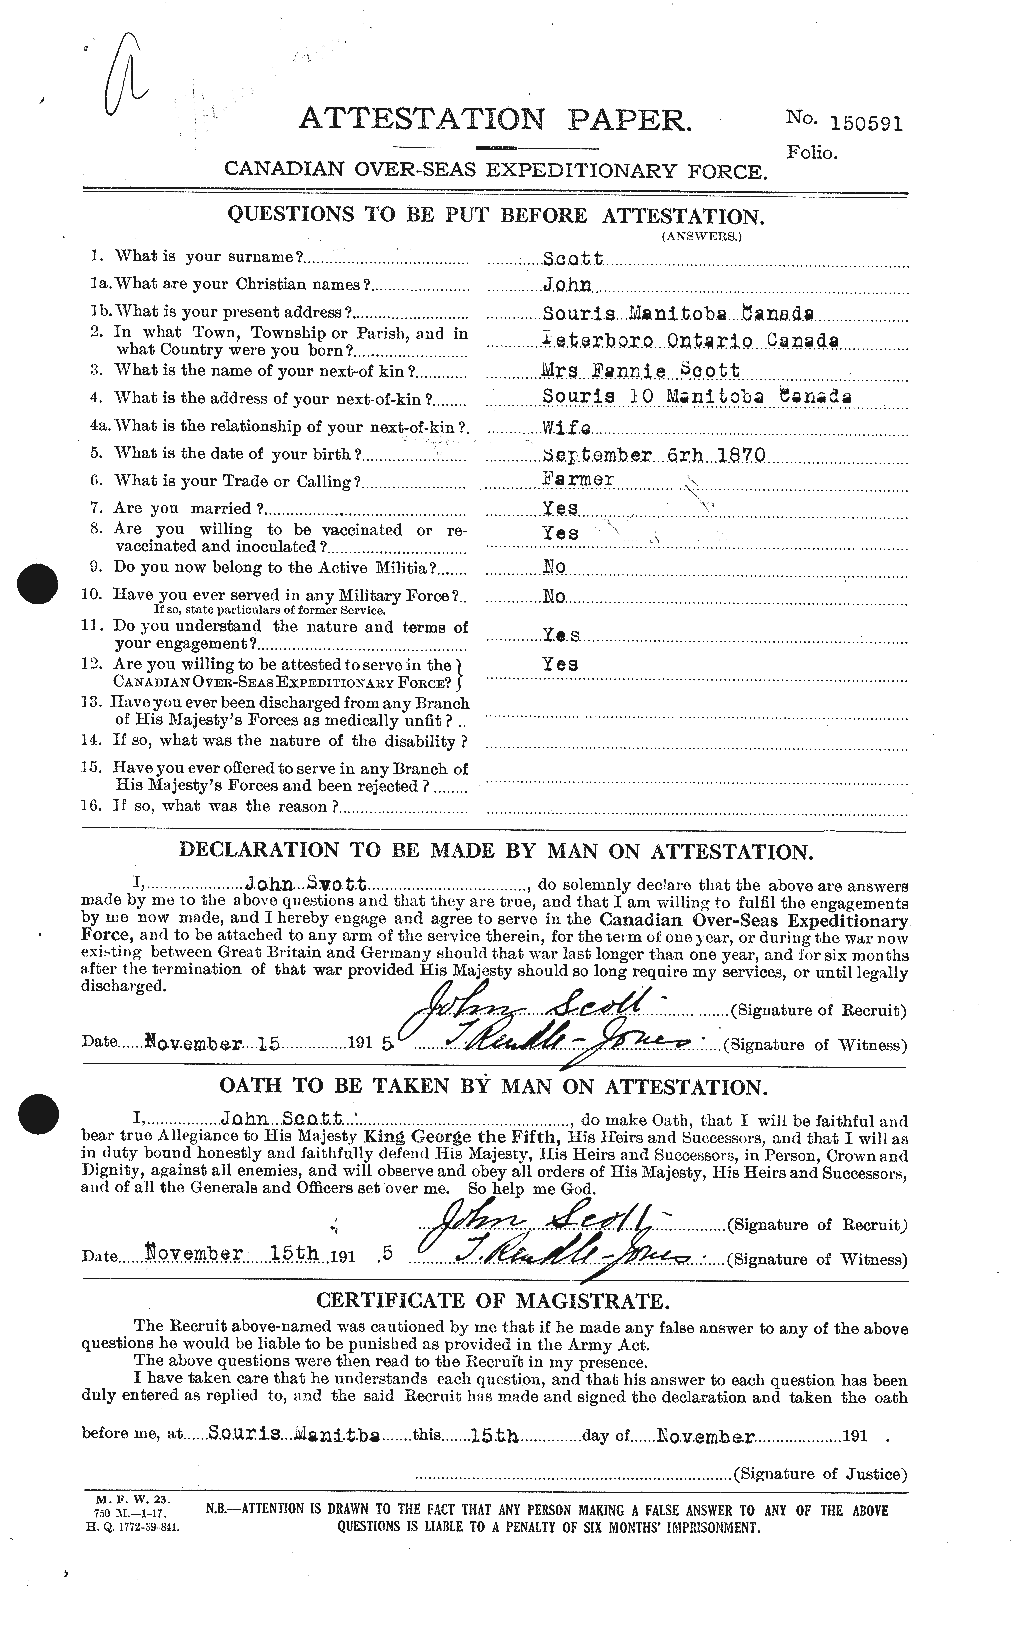 Personnel Records of the First World War - CEF 084900a